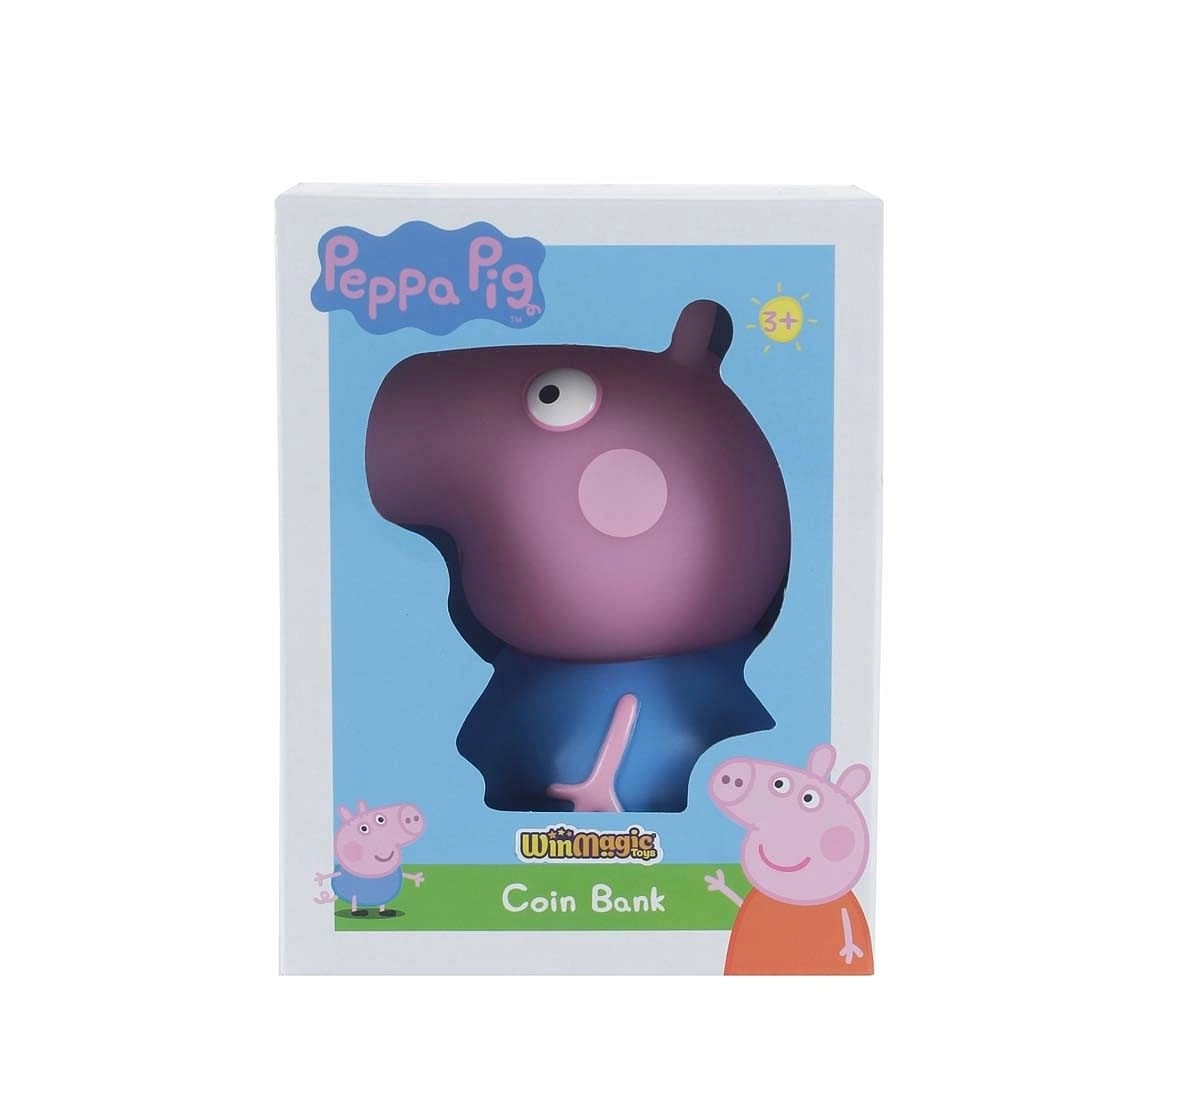 Peppa Pig George Coin Bank Novelty for Kids Age 3Y+